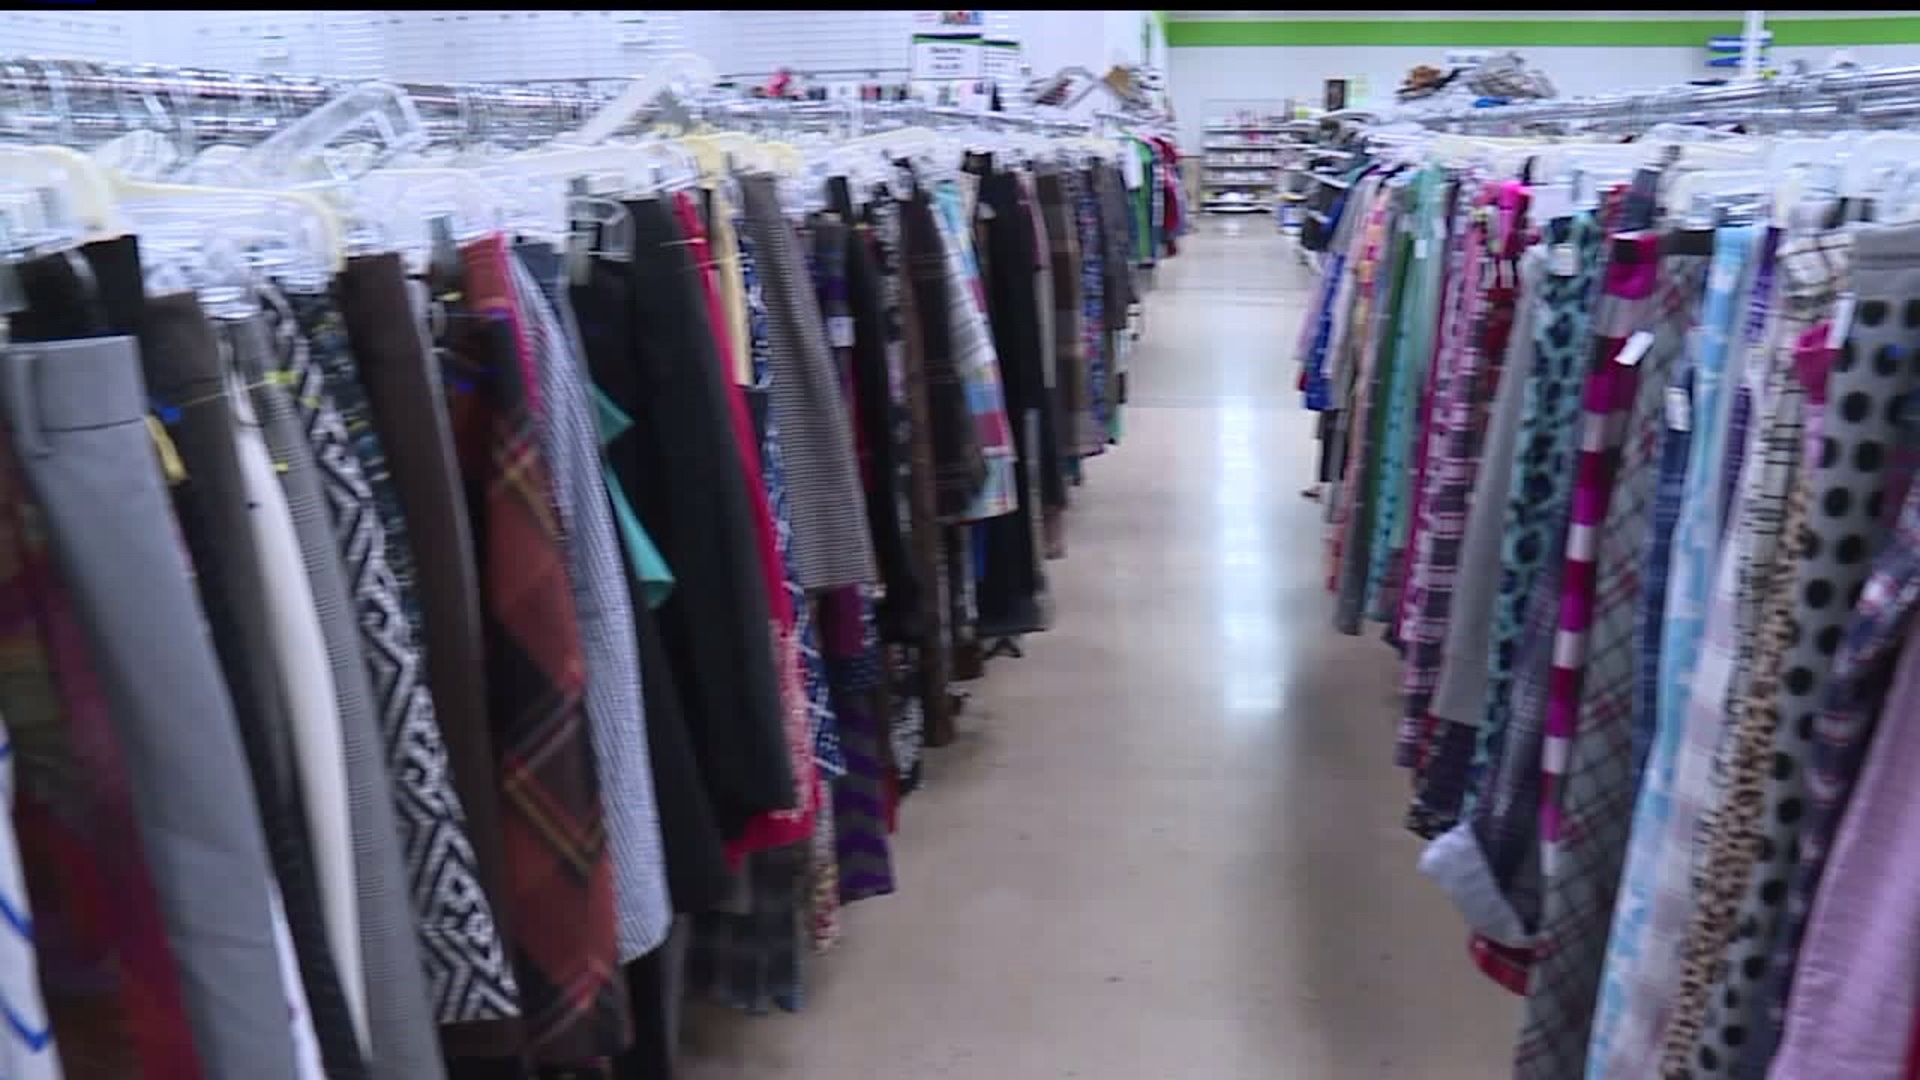 Goodwill credits Netflix for uptick in donations